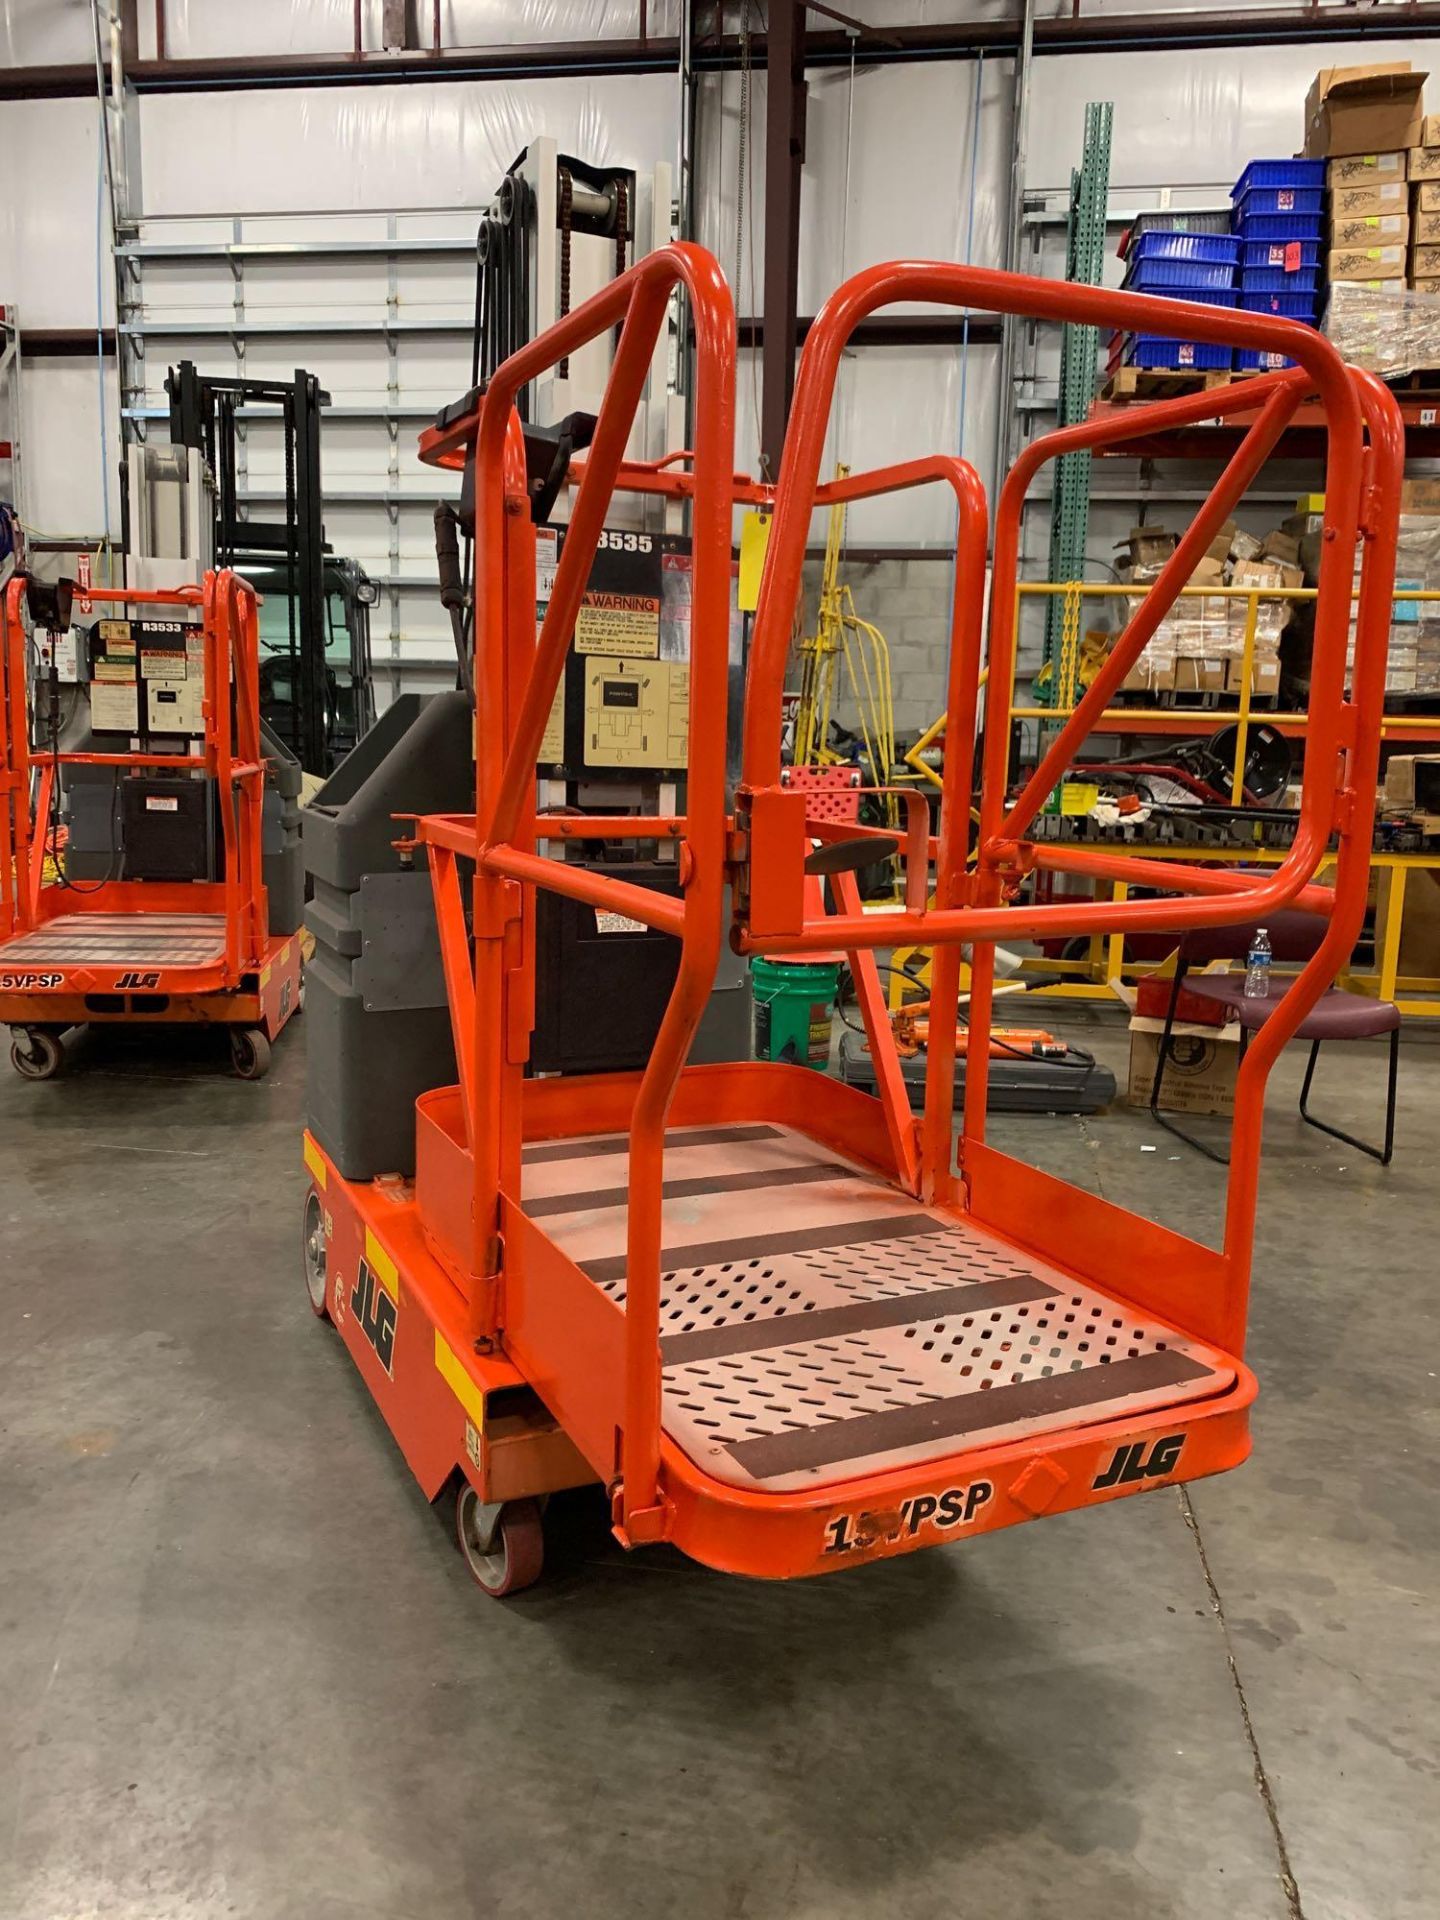 JLG 15VP SP ELECTRIC MANLIFT, SELF PROPELLED, BUILT IN CHARGER, 15’ PLATFORM HEIGHT, RUNS AND OPERAT - Image 3 of 6